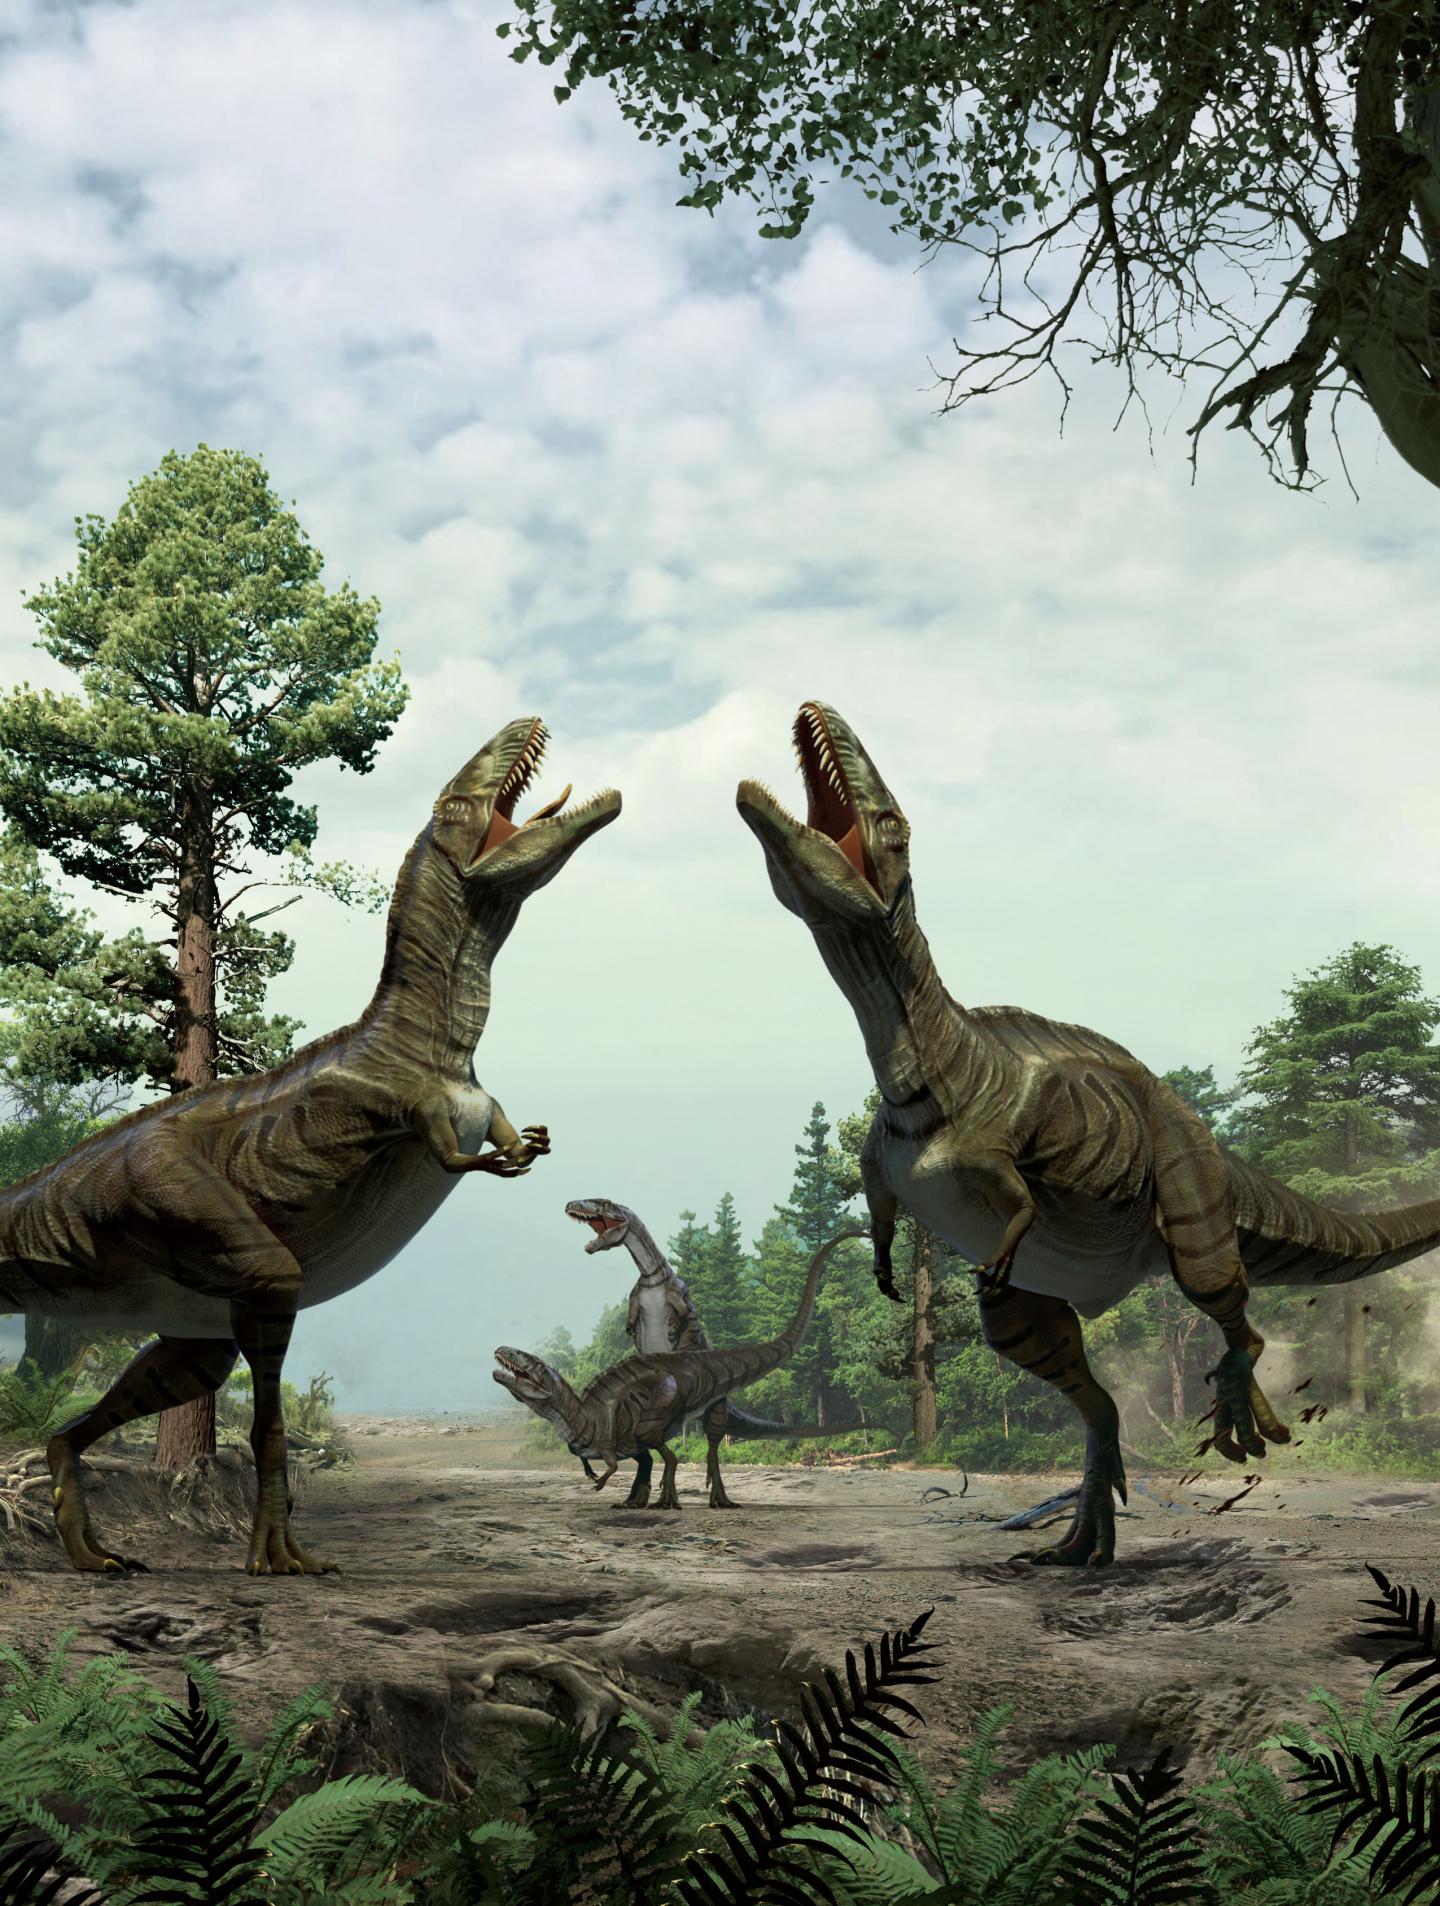 Reconstruction of Dinosaurs Engaged in Sexual Display Activity